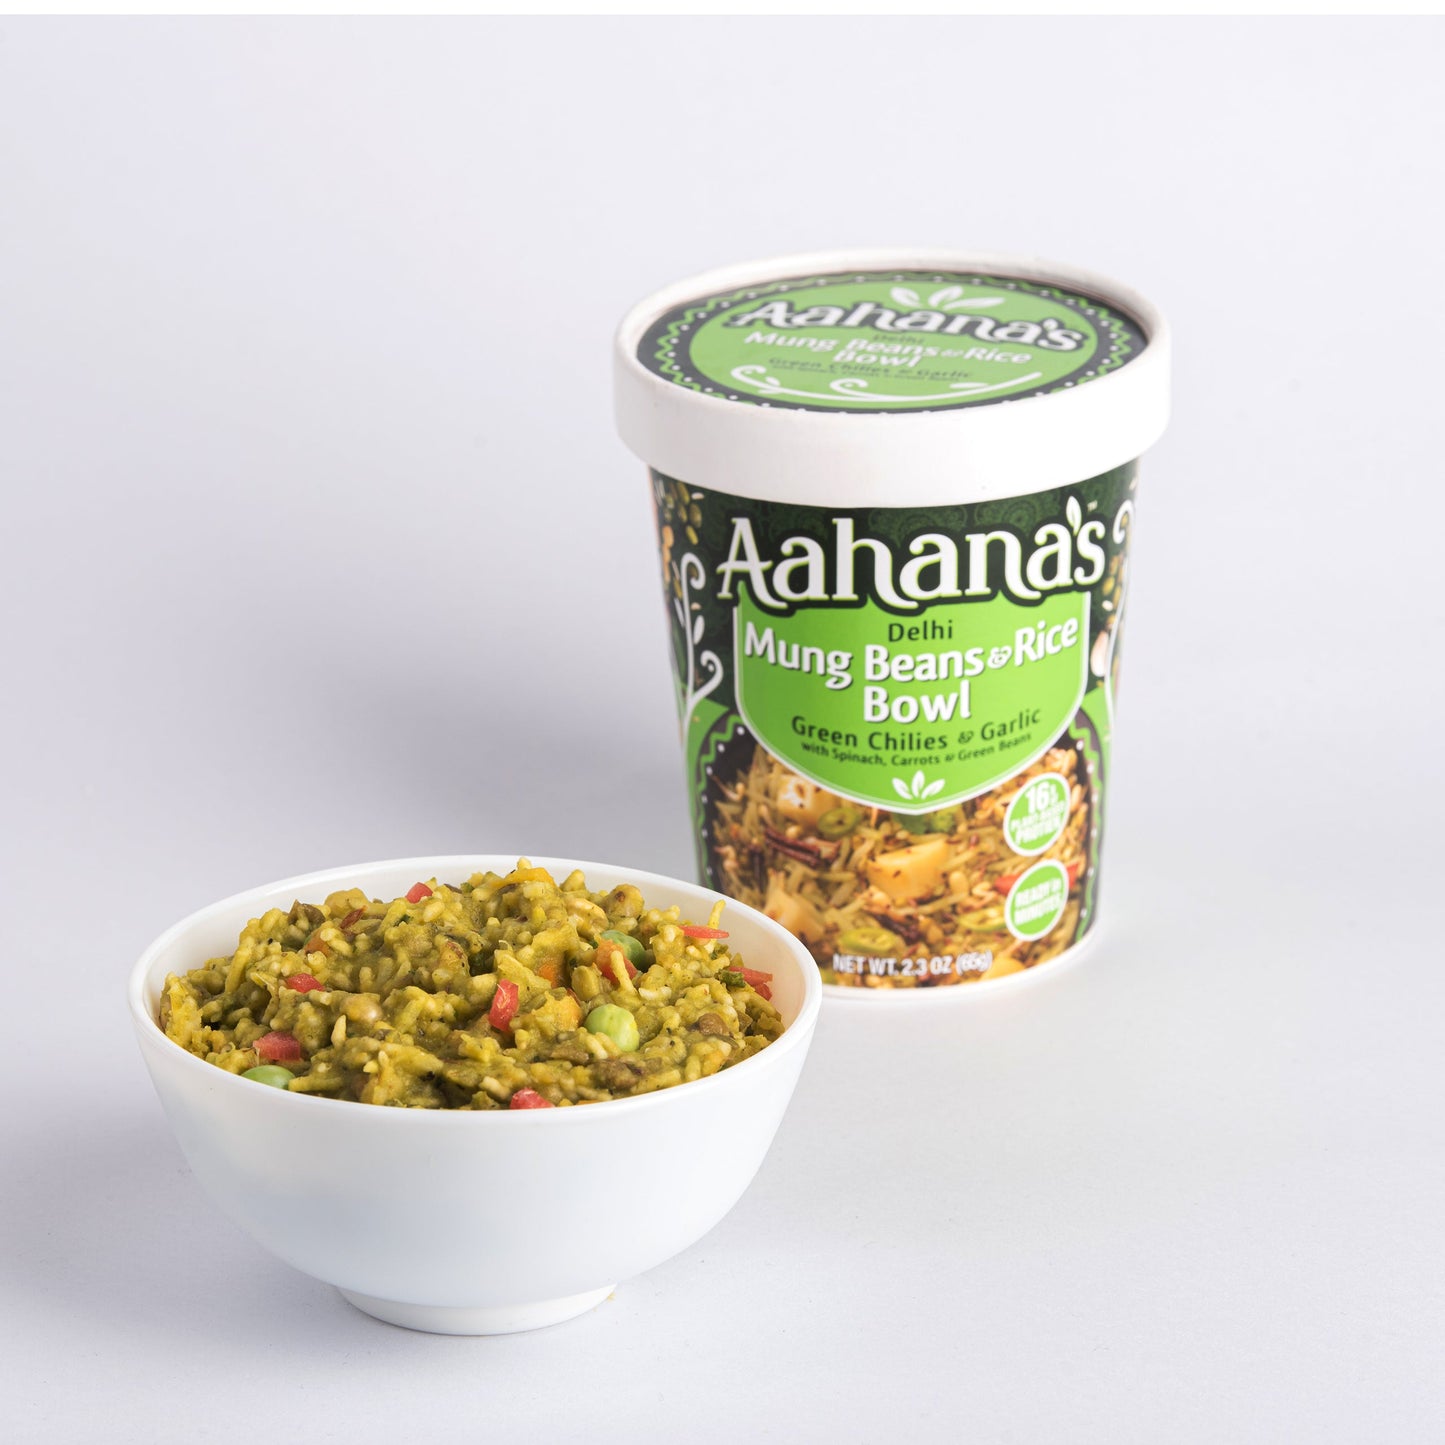 Aahana’s Delhi Mung Beans & Rice Bowl (Khichdi) - Gluten-Free, 16g Plant-Based Protein, Vegan, Non-GMO, Ready-to-Eat Meal (2.3oz., Pack of 4)